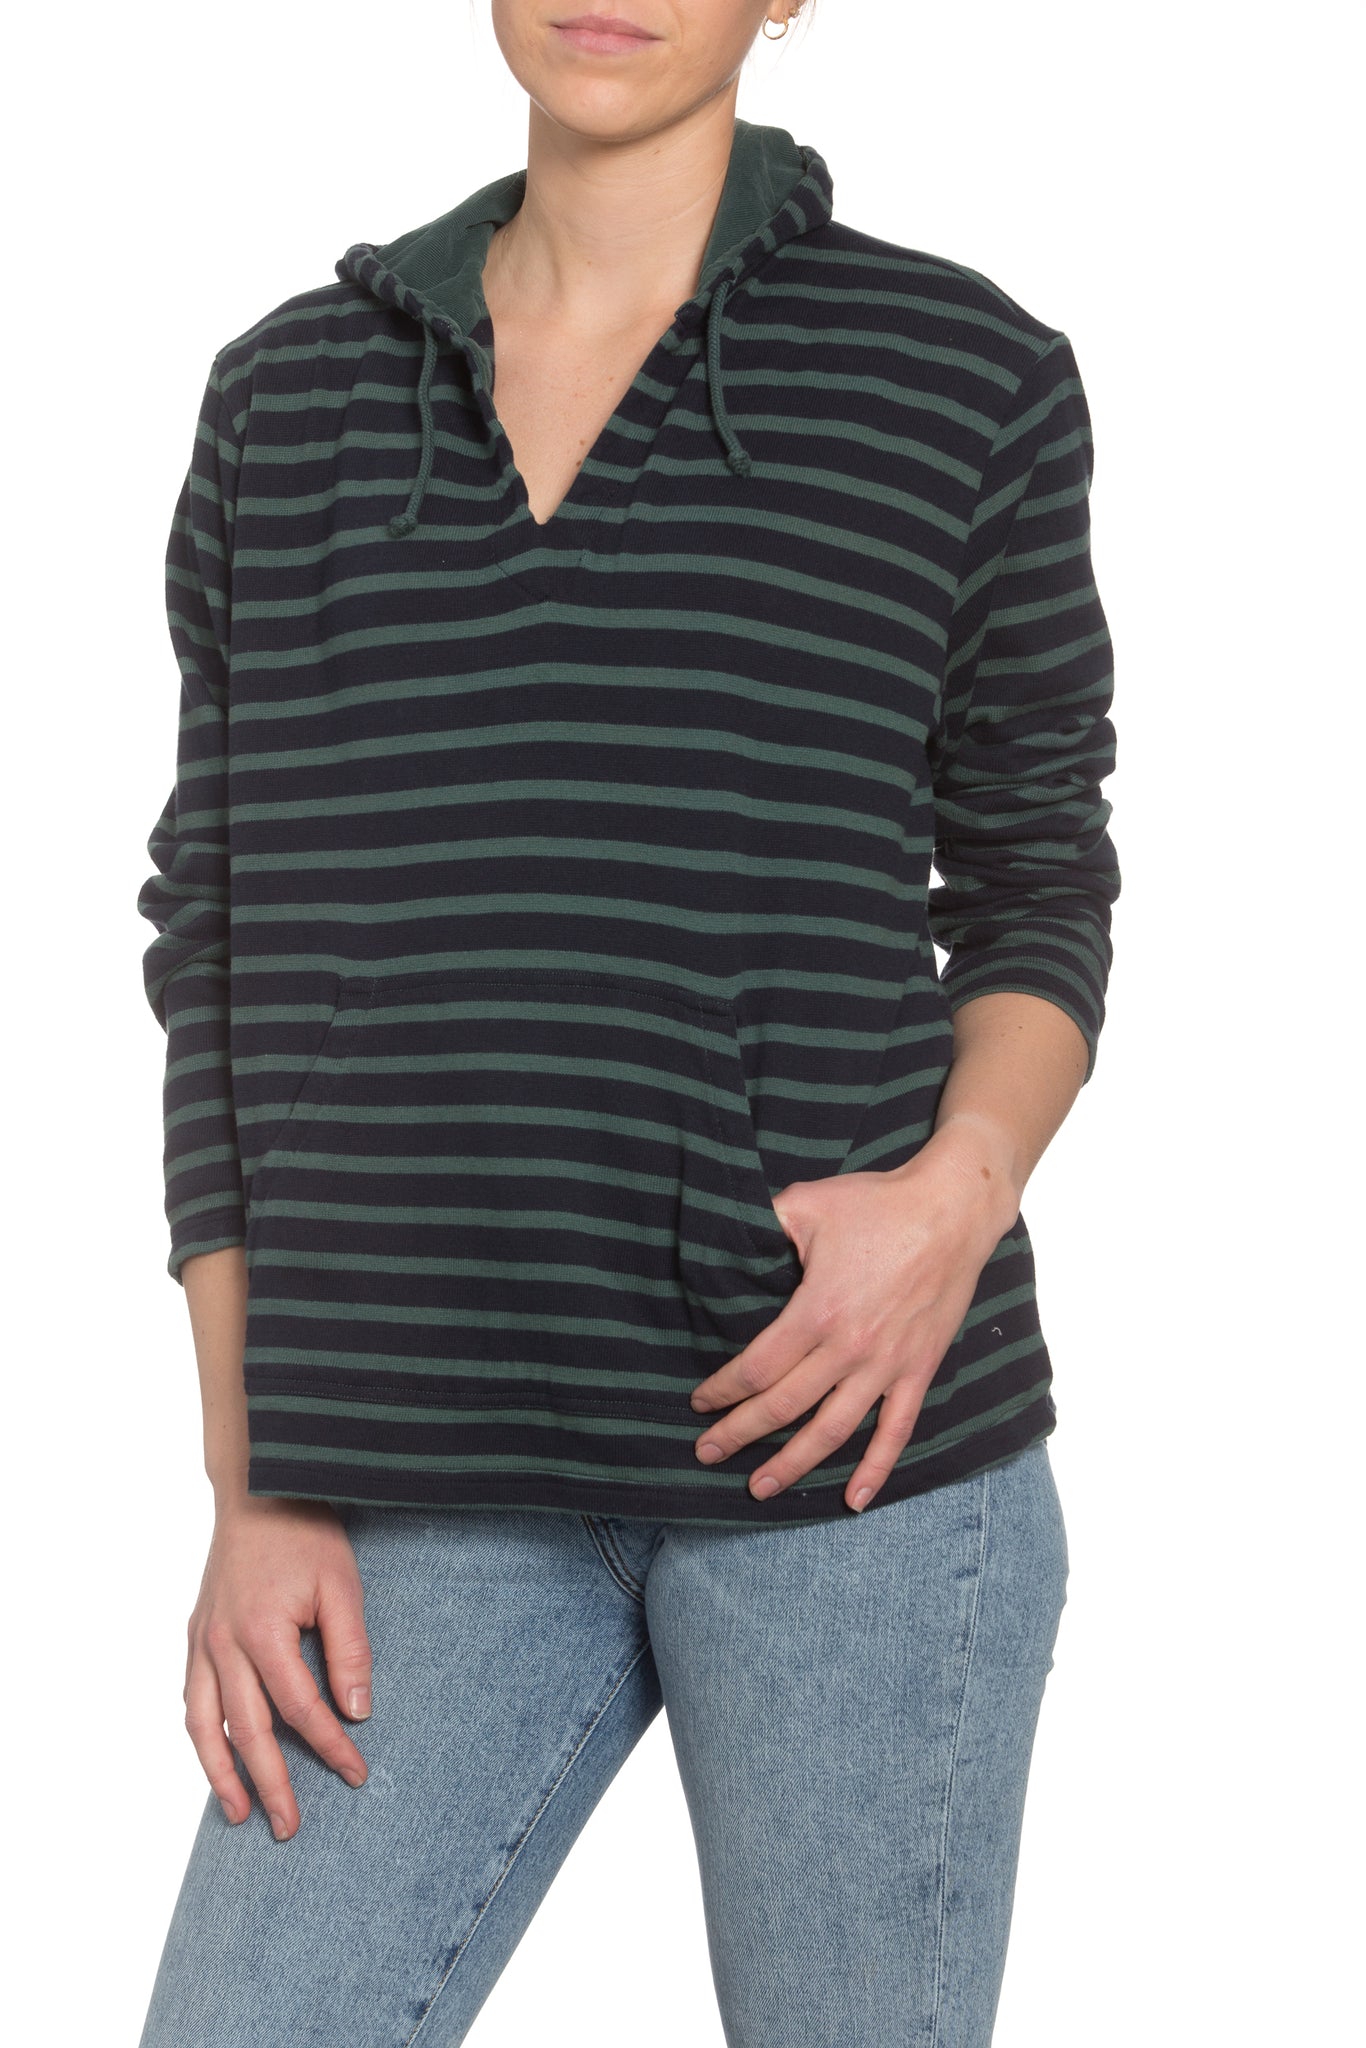 French Stripe Hoodie in Hunter